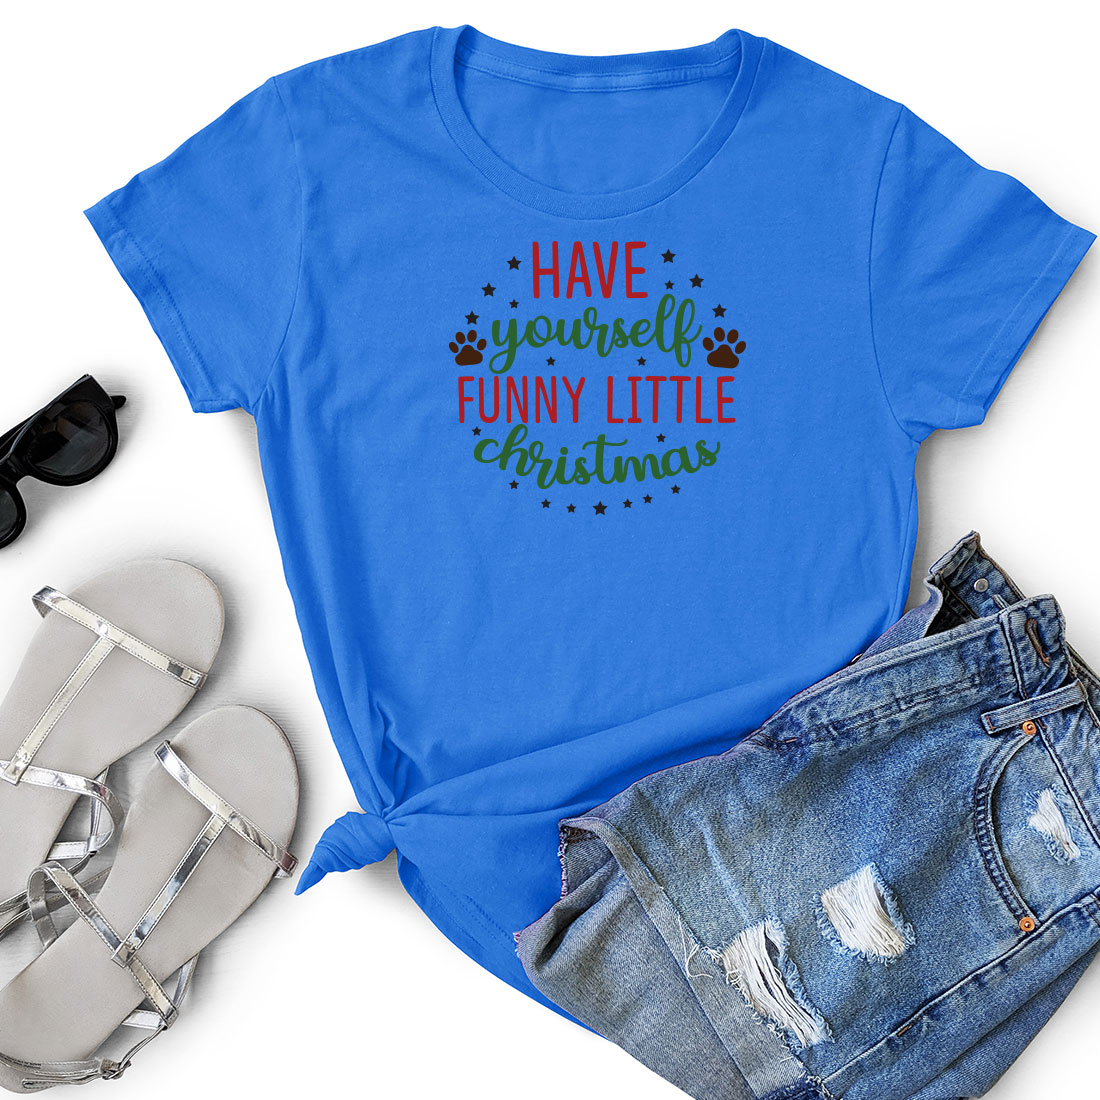 T - shirt that says have yourself a funny little christmas.